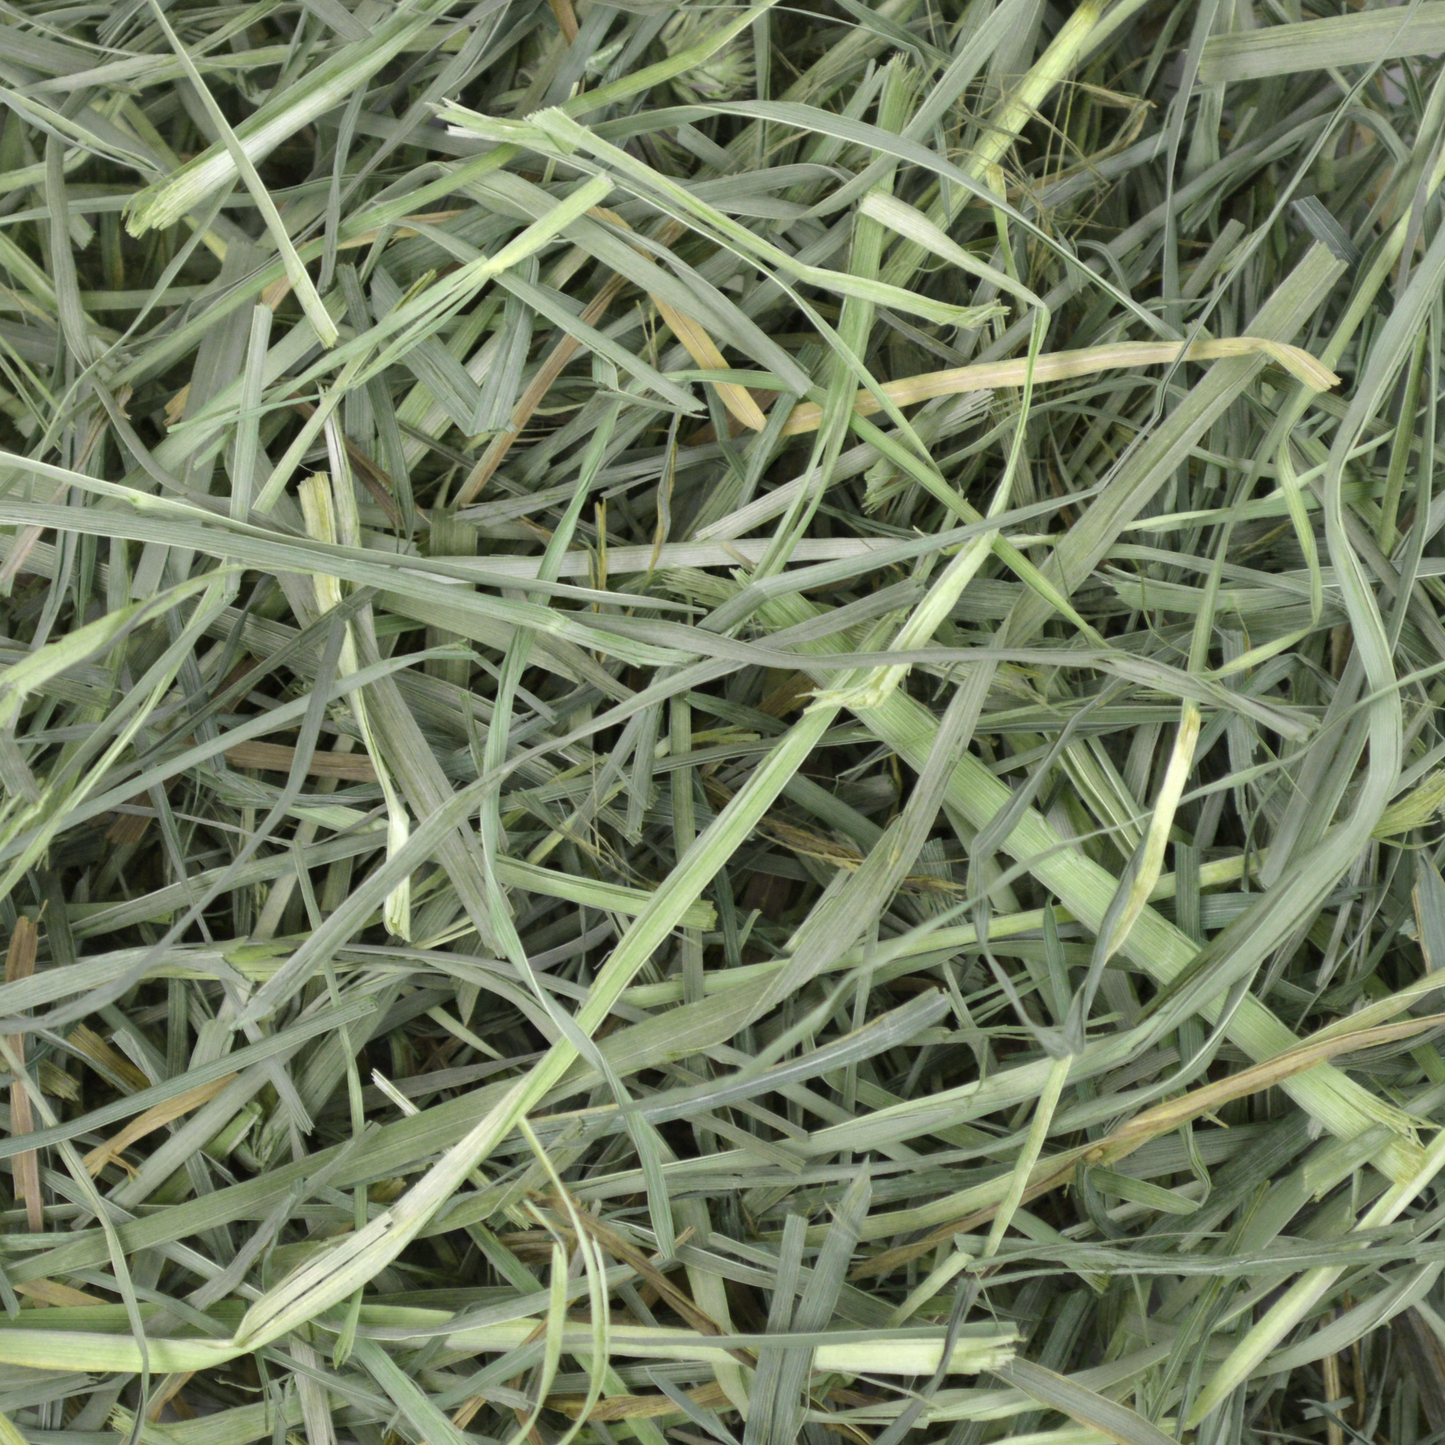 Oxbow® Orchard Grass Hay